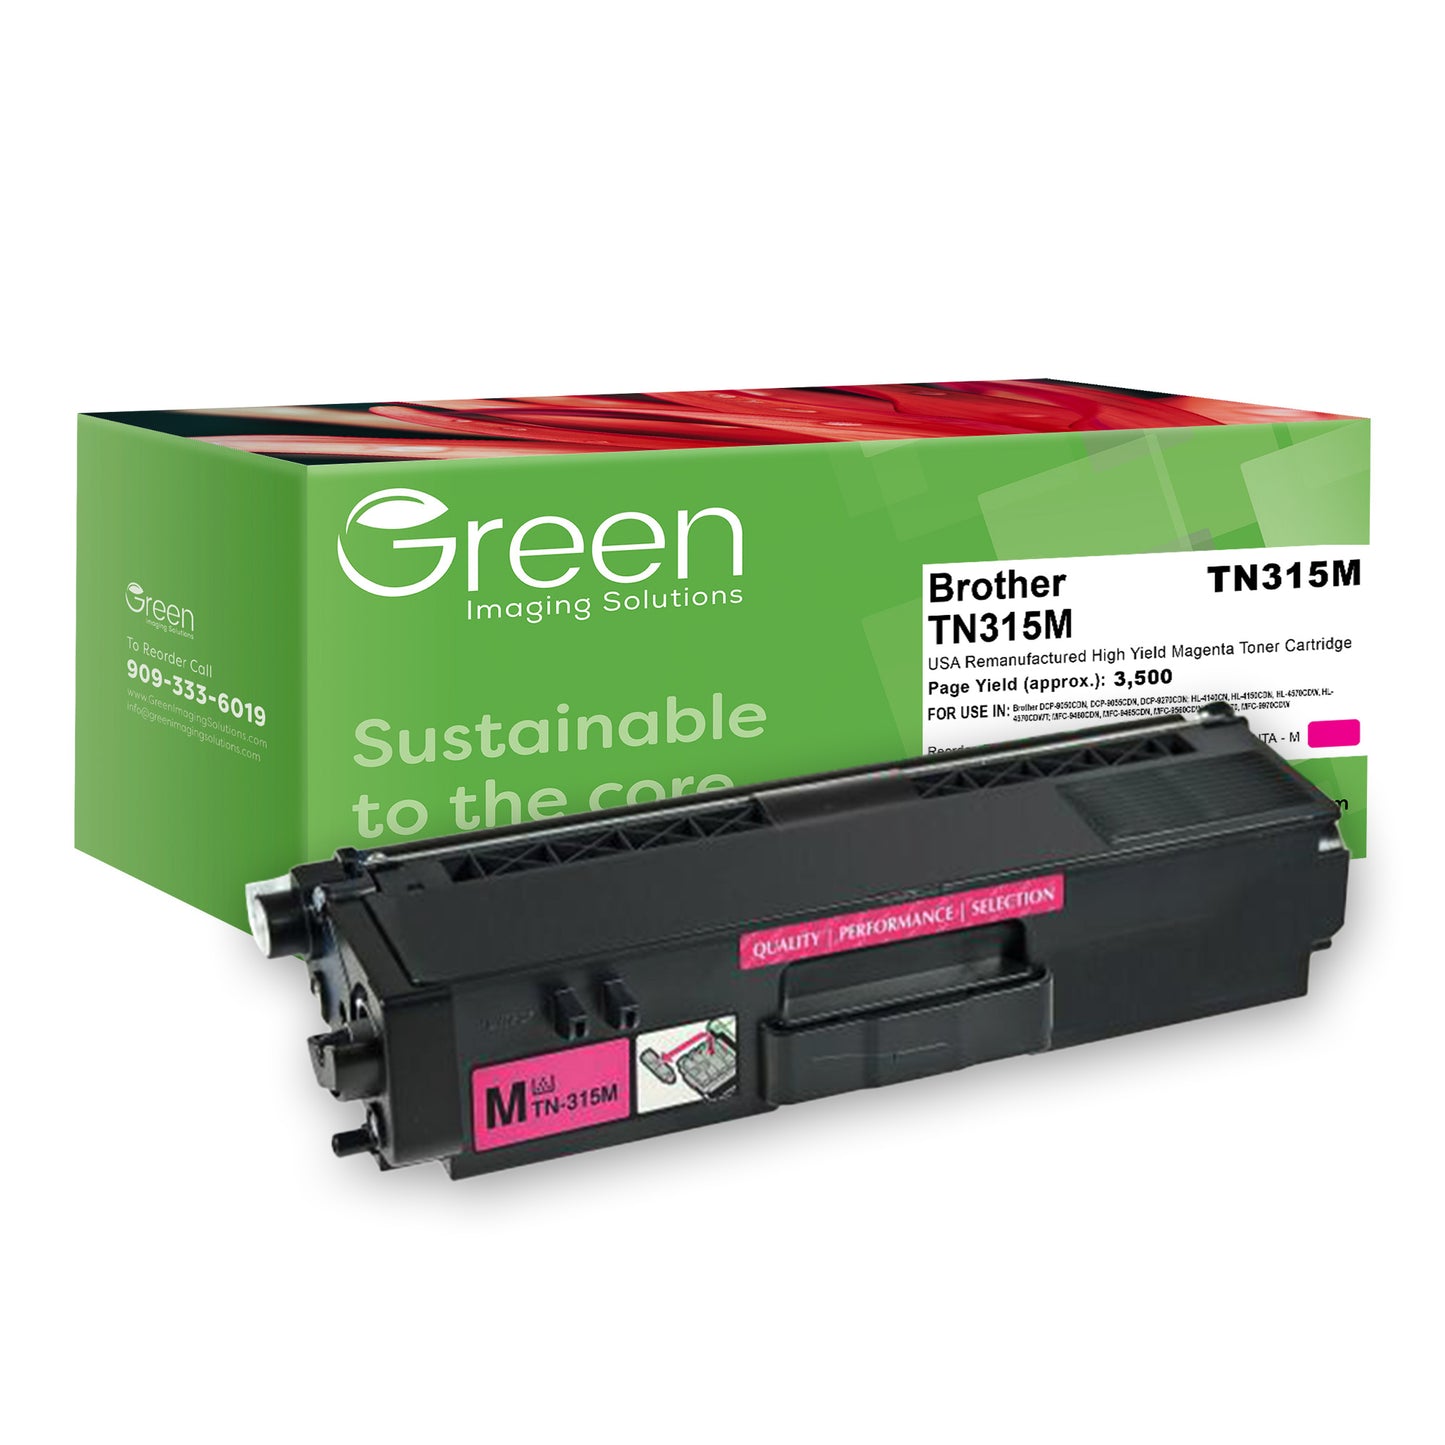 Green Imaging Solutions USA Remanufactured High Yield Magenta Toner Cartridge for Brother TN315